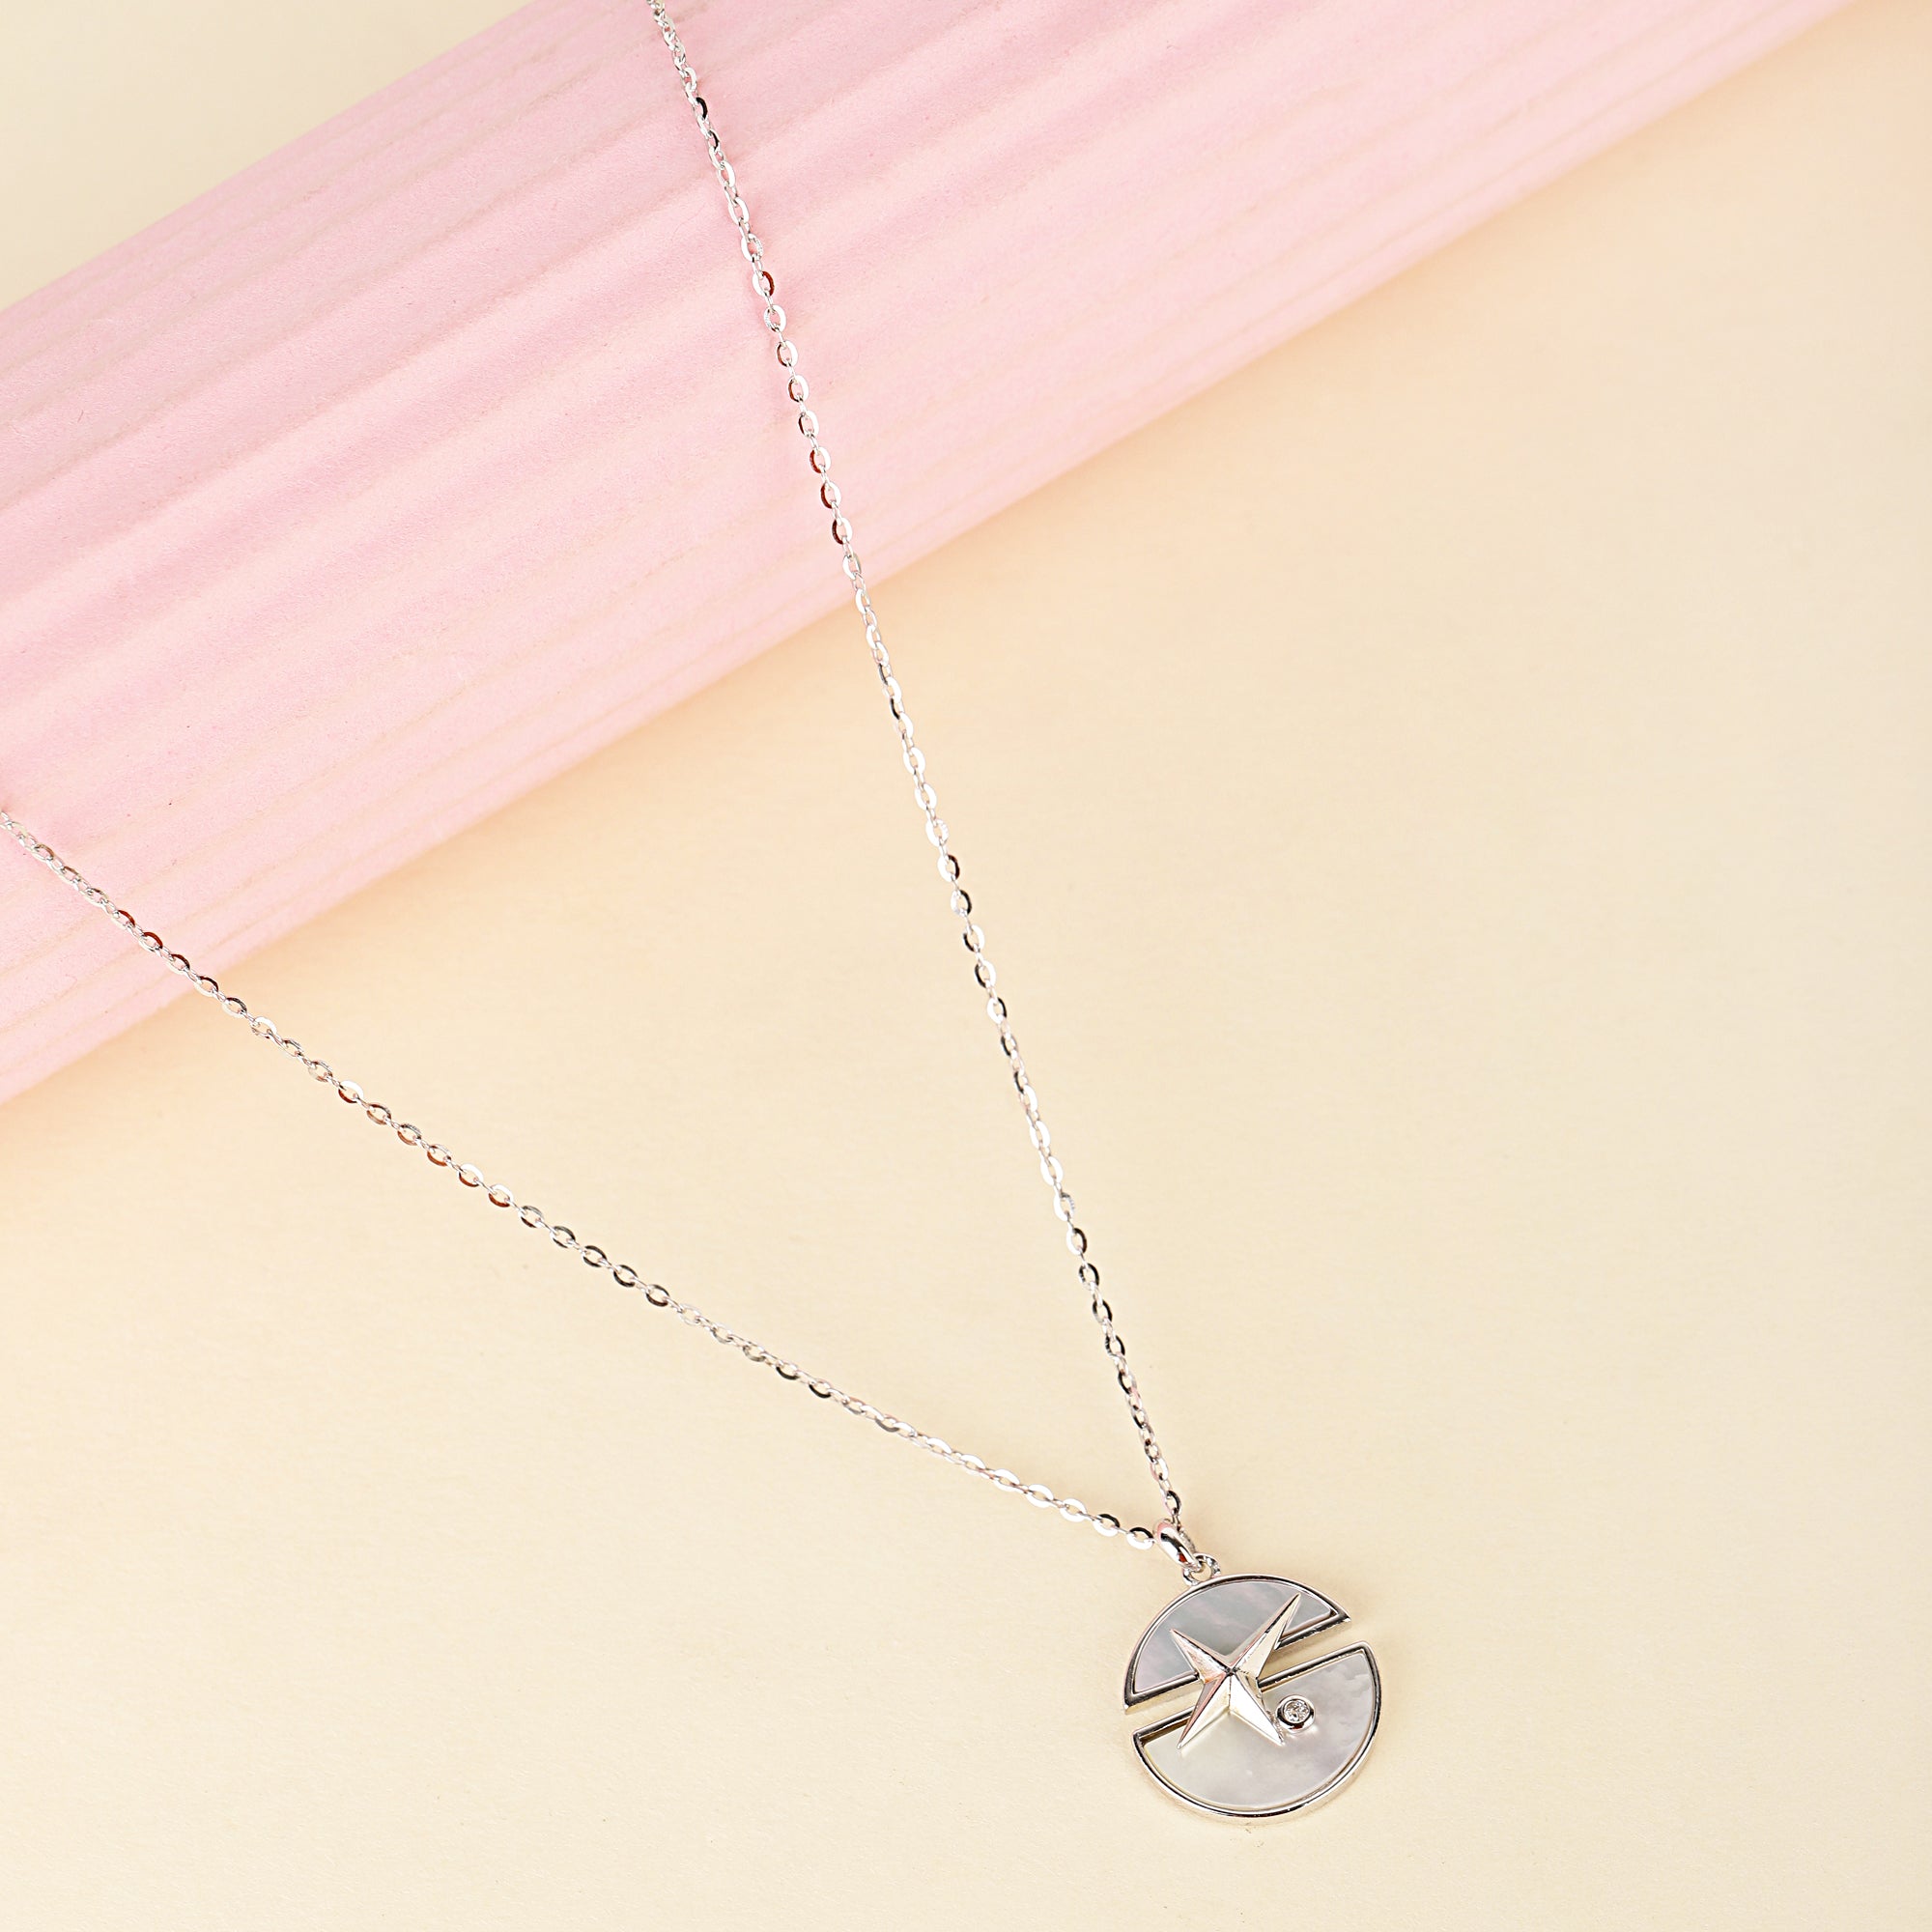 Silver sparkling star necklace